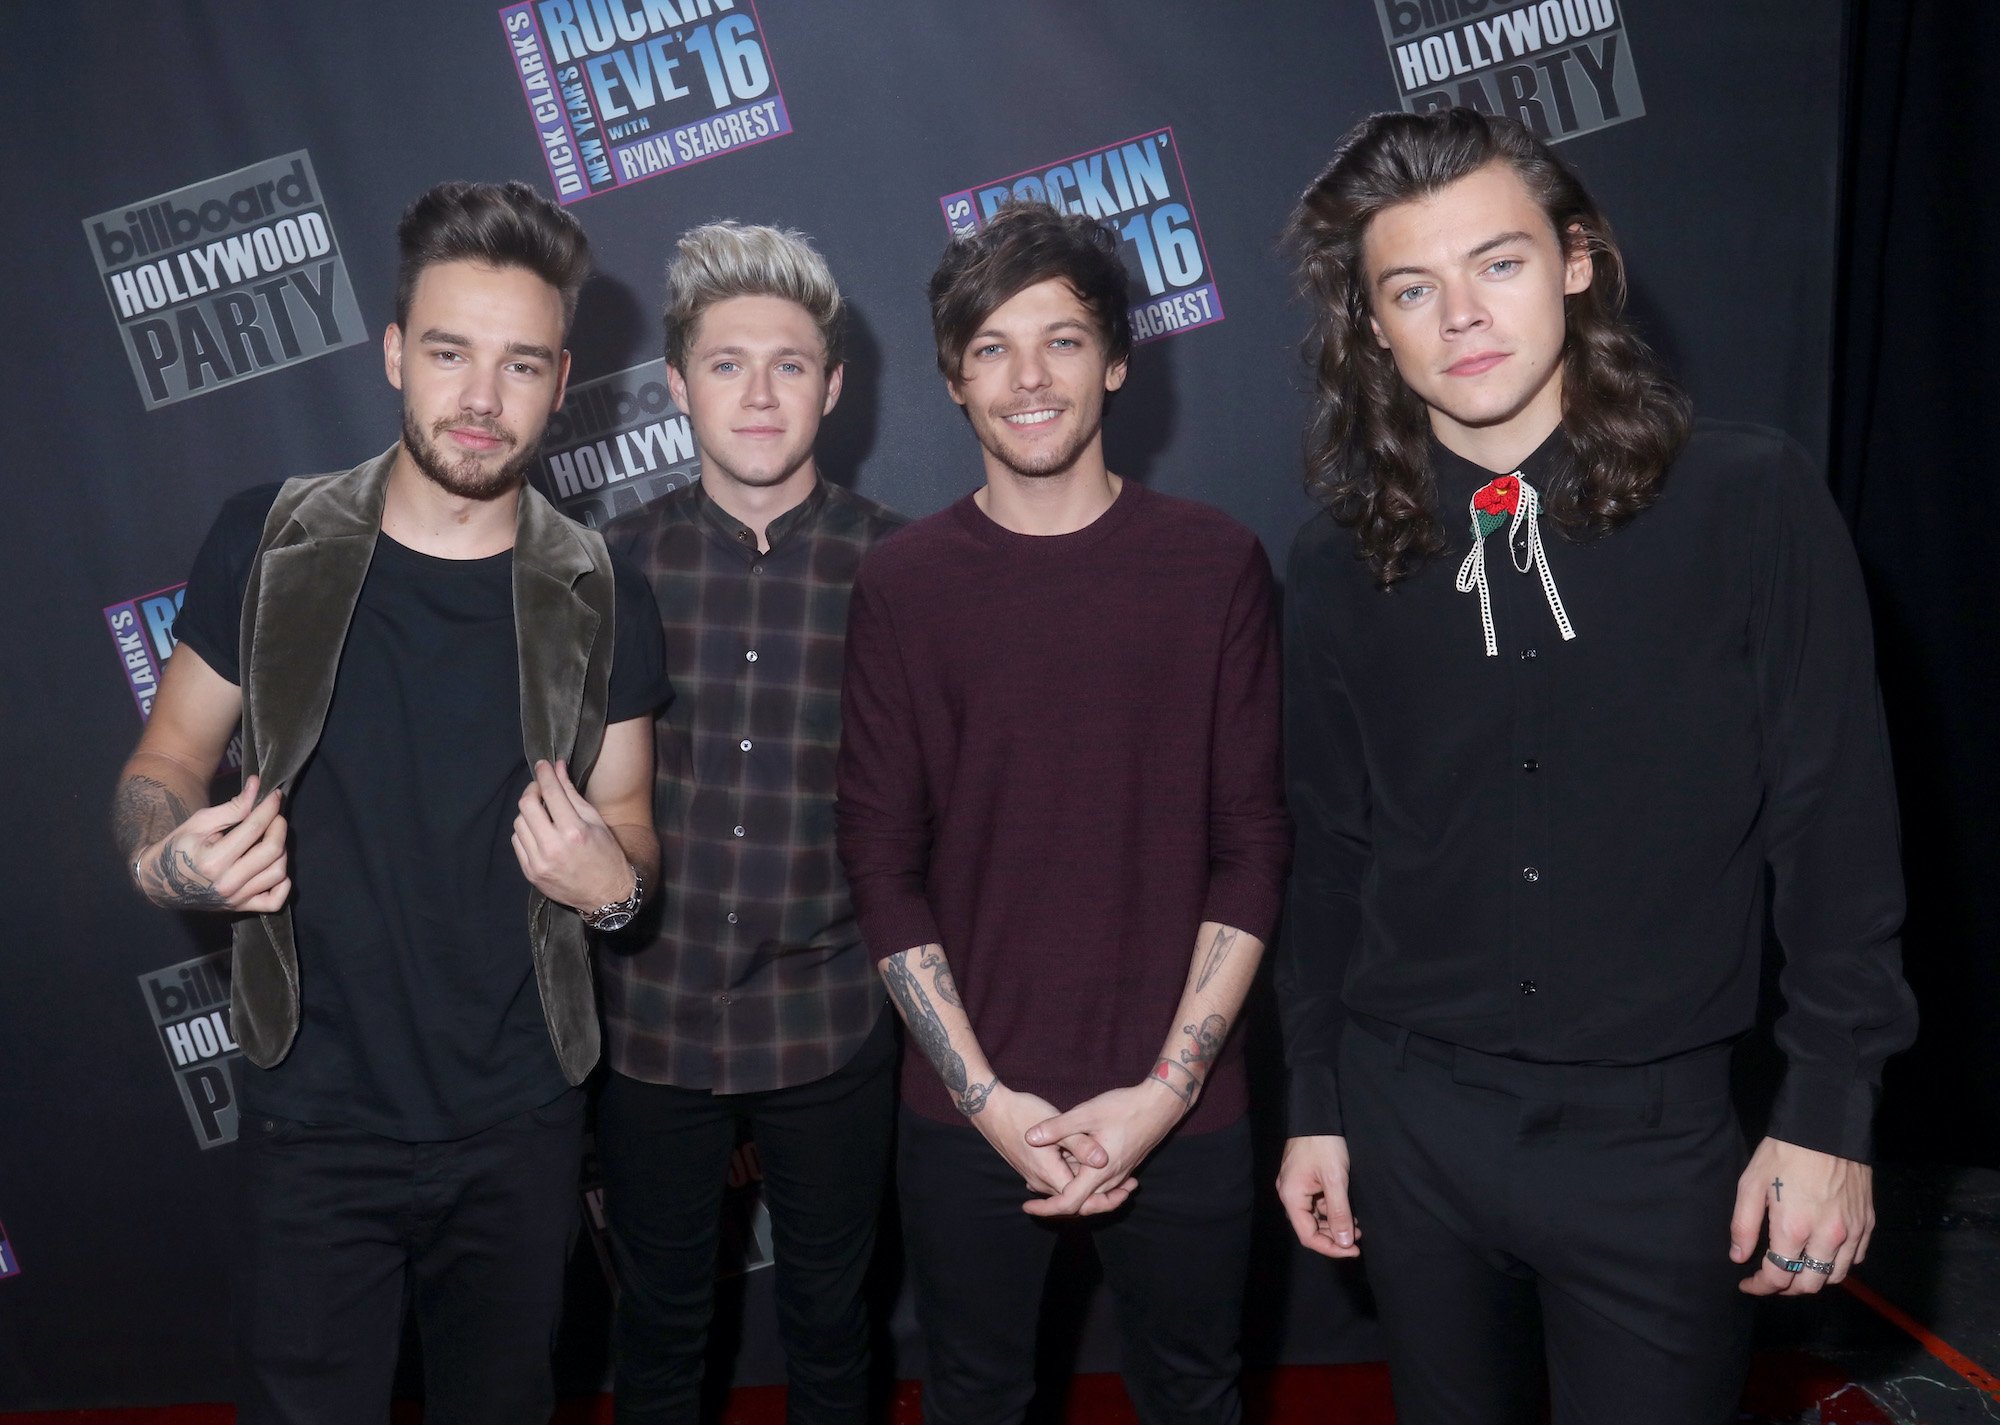 One Direction Ages: How Old Were the Boys on 'The X Factor'?